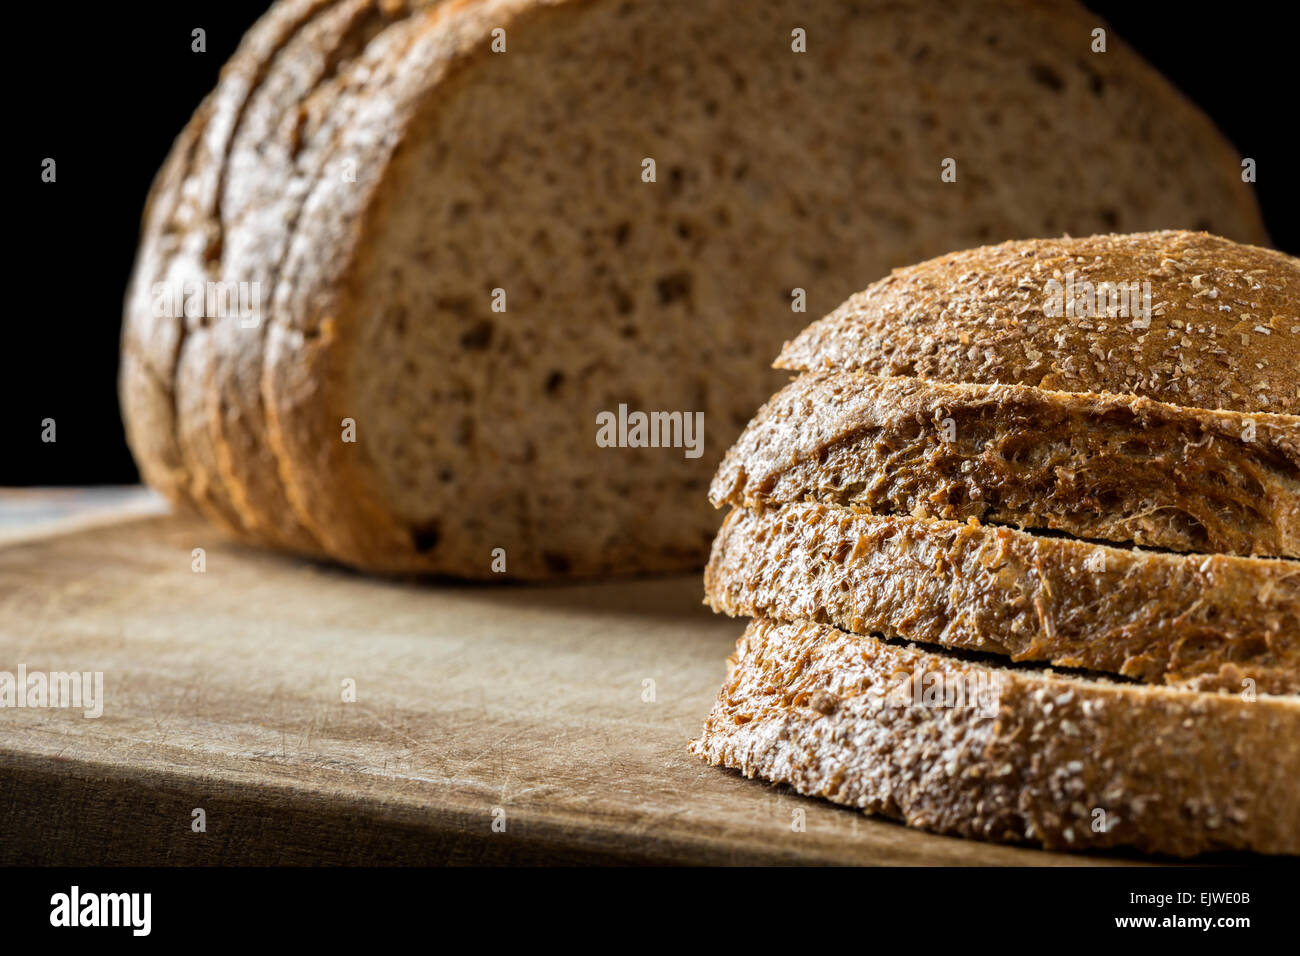 Slices of brown bread on a wooden table Stock Photo